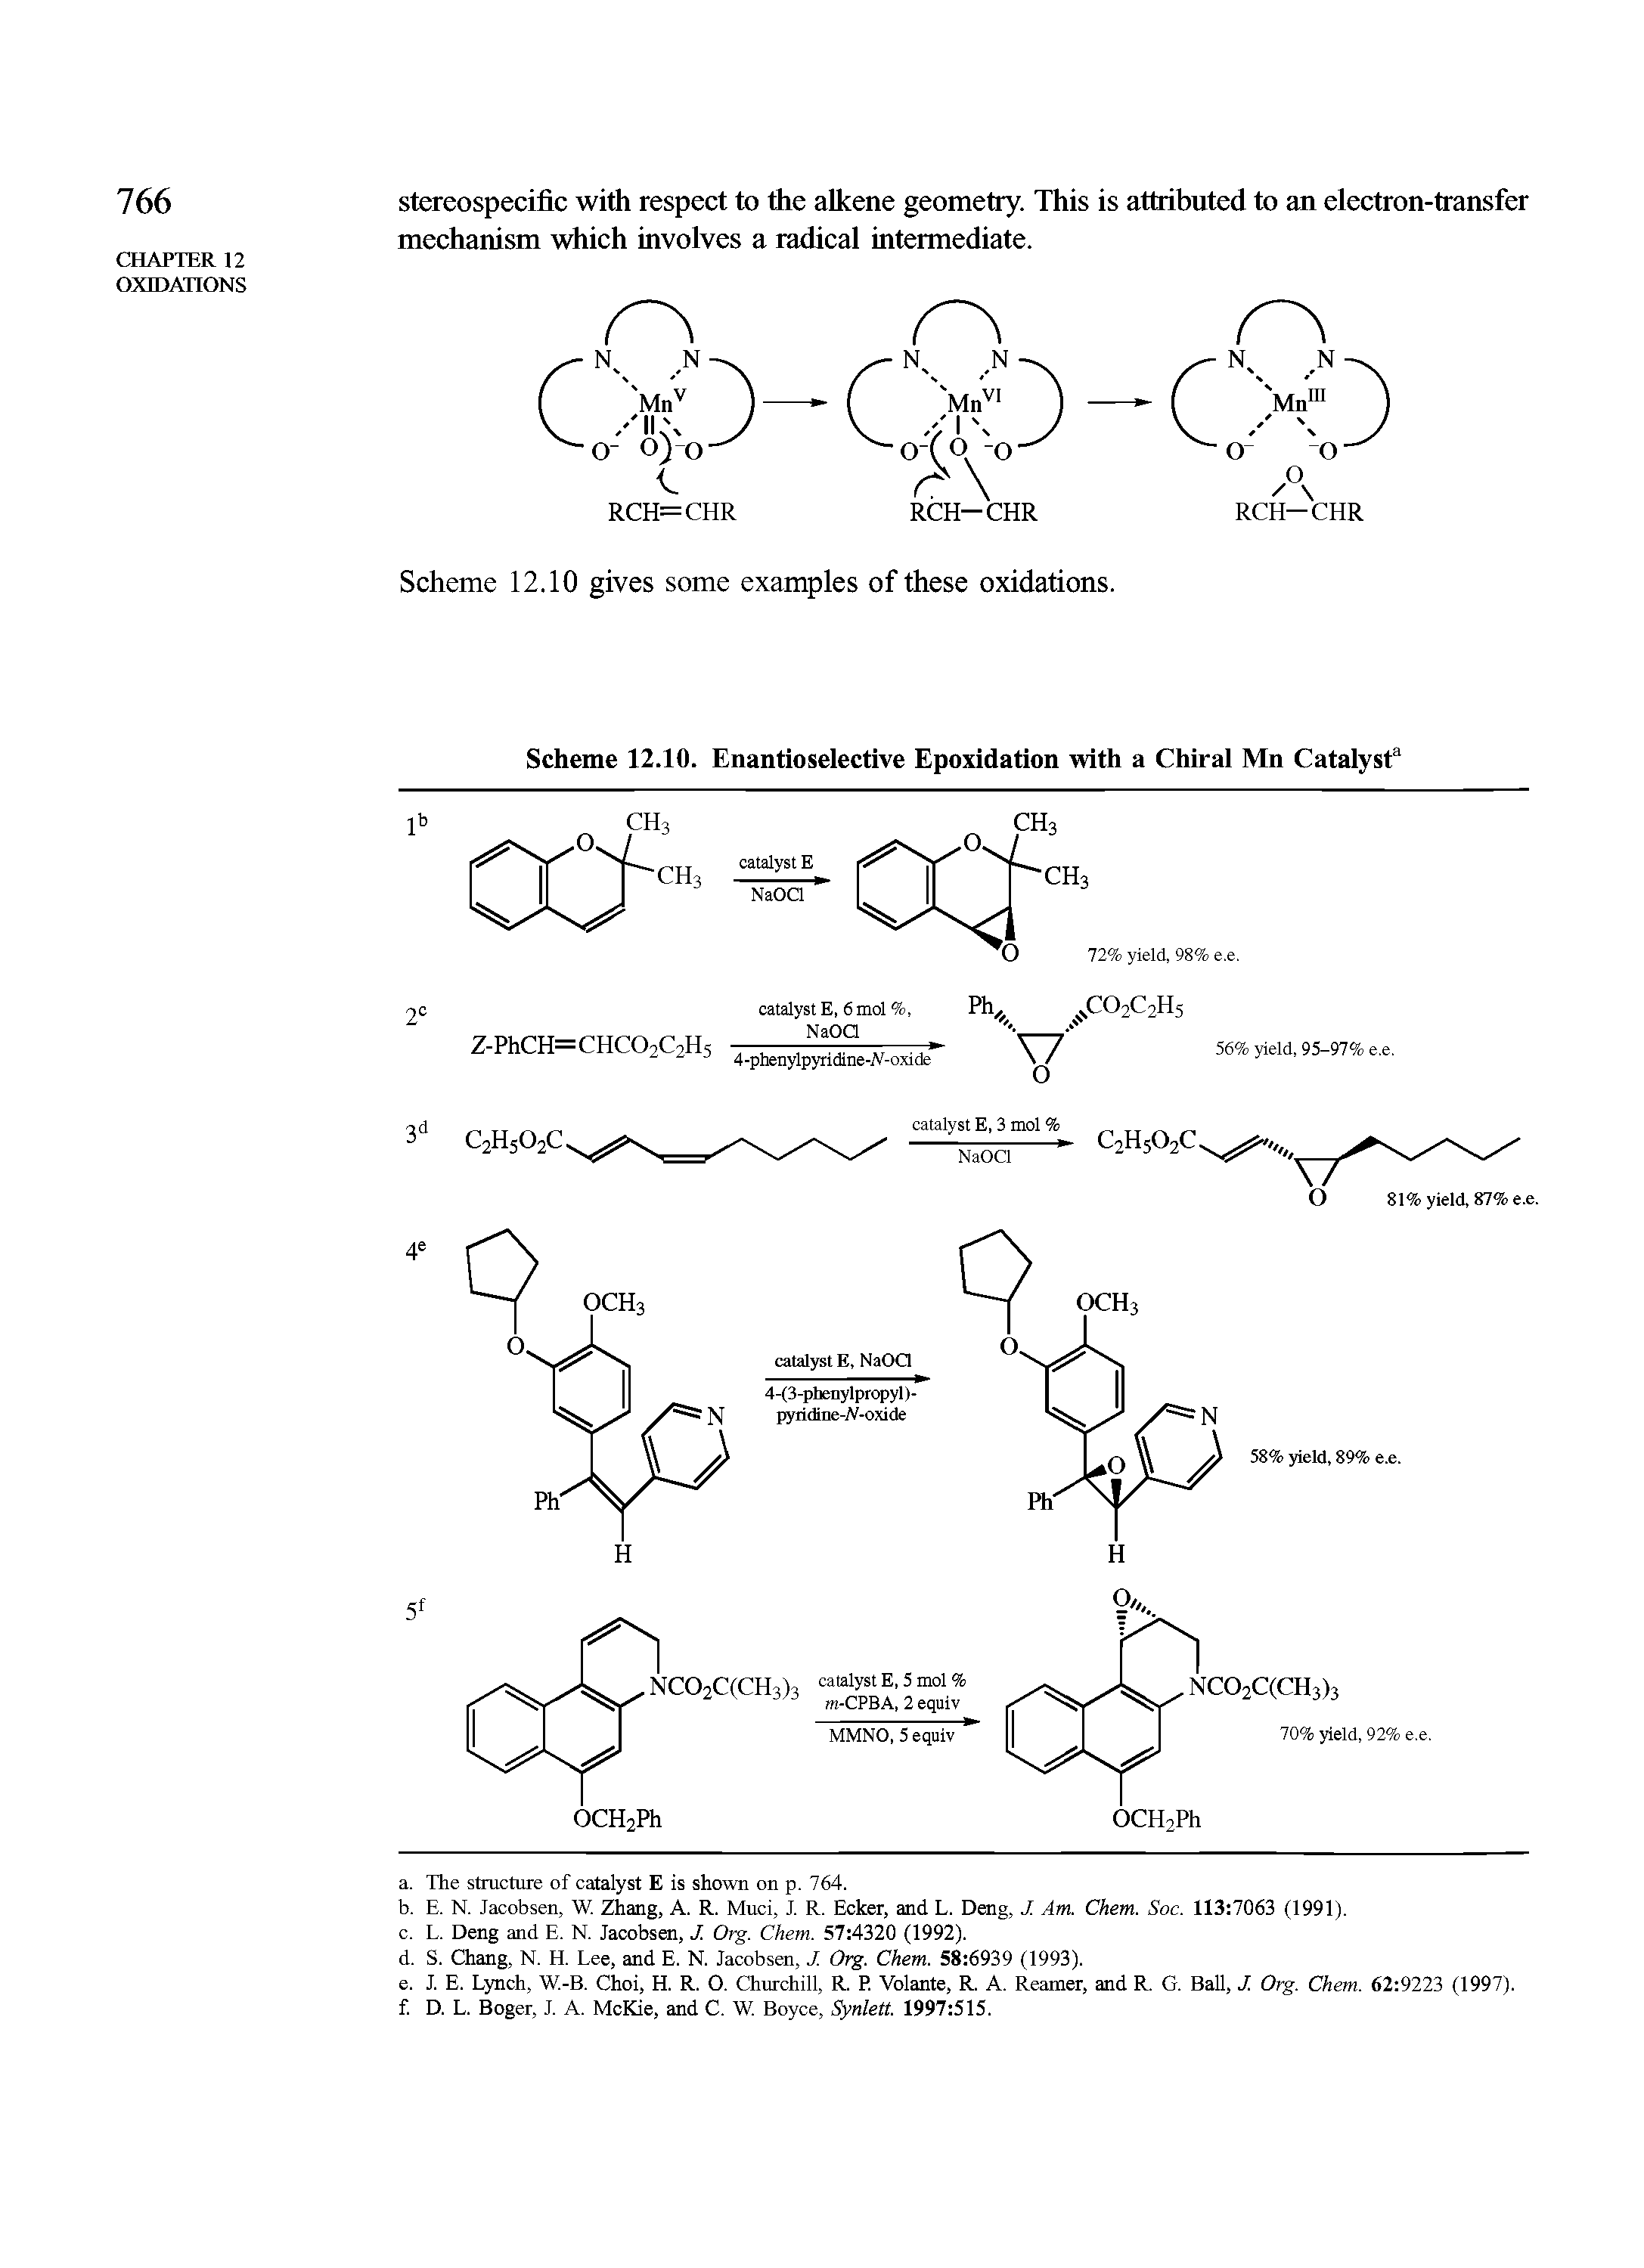 Scheme 12.10. Enantioselective Epoxidation with a Chiral Mn Catalyst3...